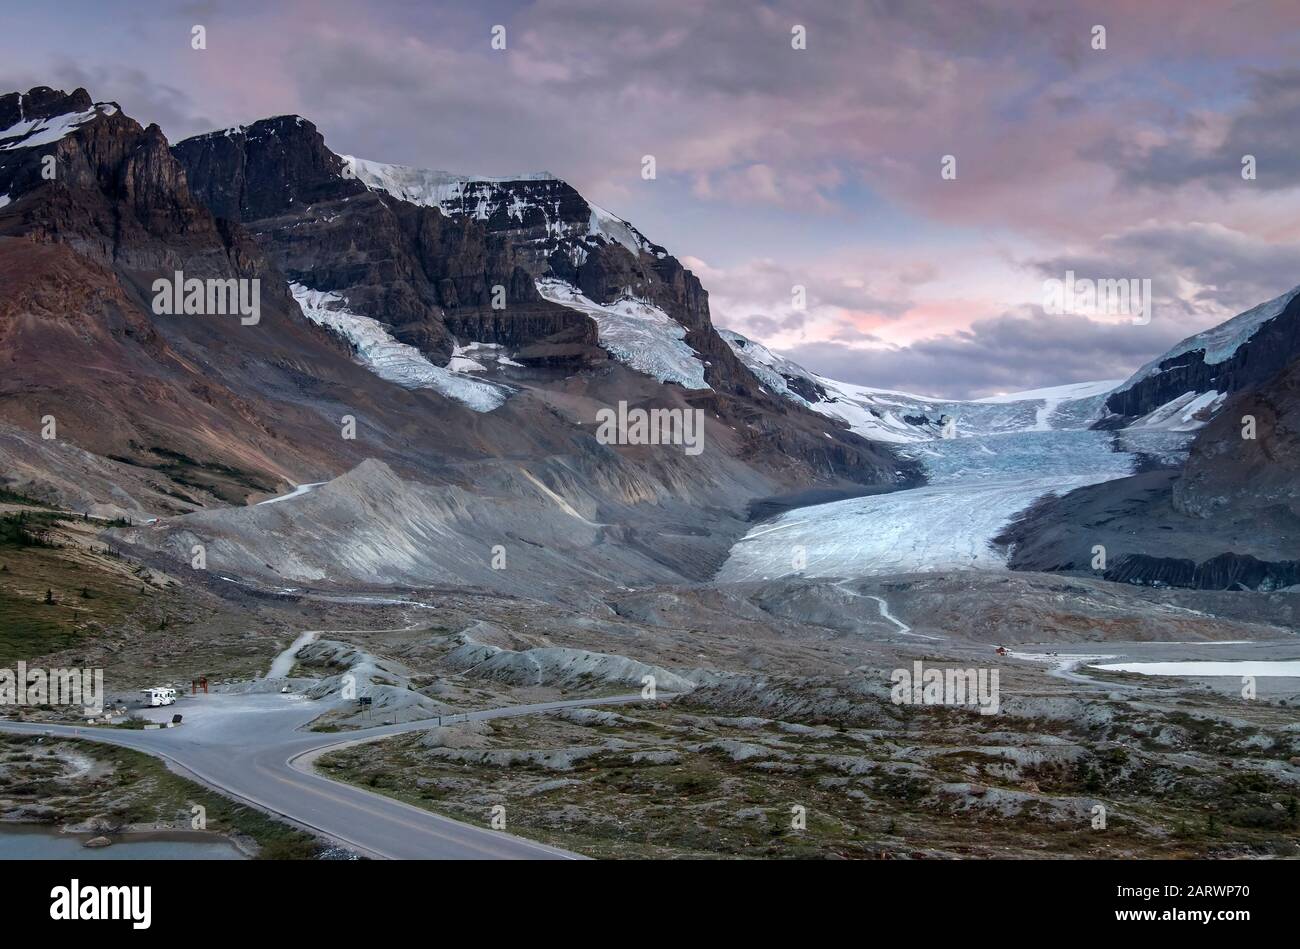 A Motorhome at the base of the Athabasca Glacier, backed by Mount Athabasca & Mount Andromeda, Jasper National Park, Canadian Rockies, Alberta, Canada Stock Photo